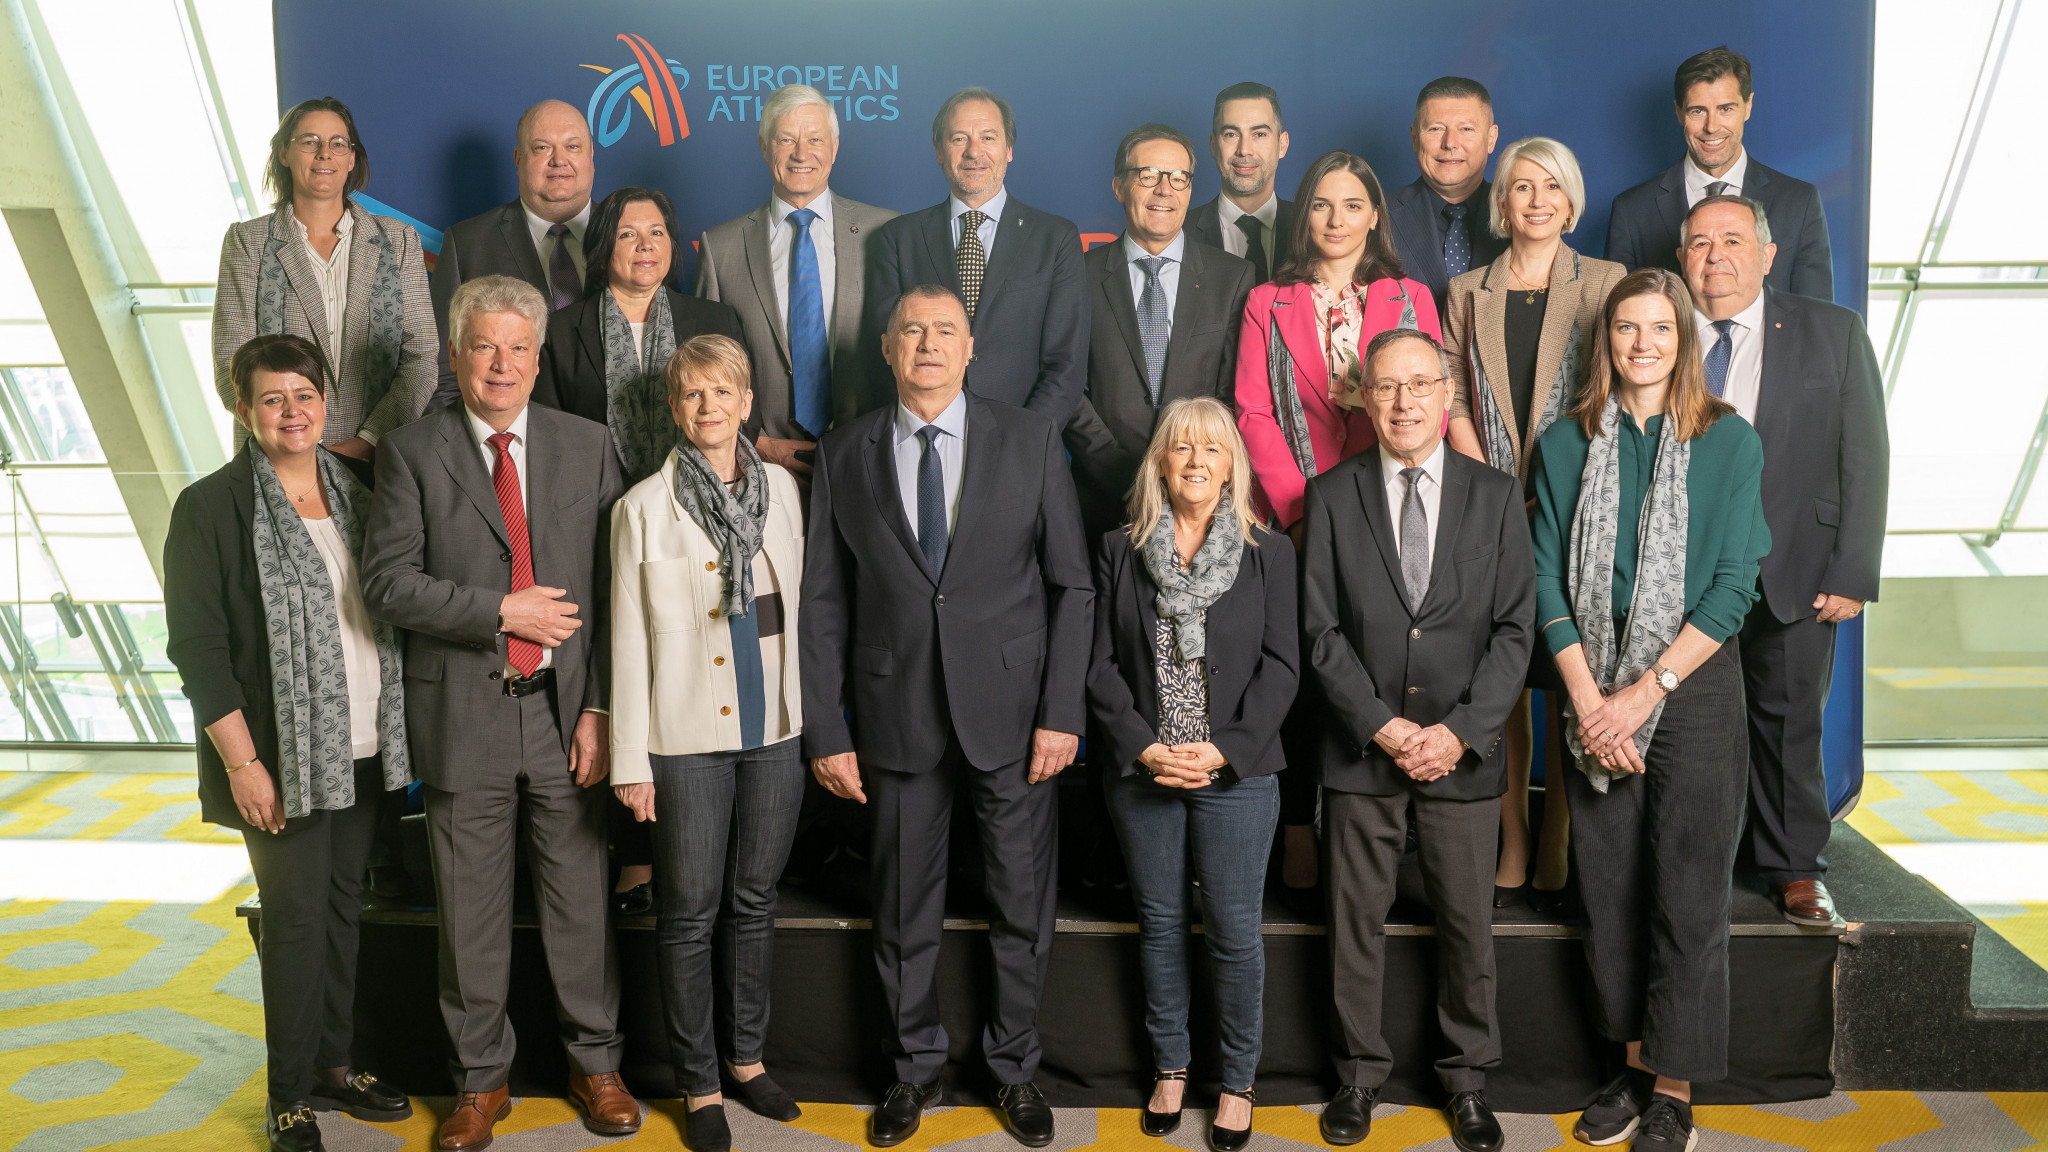 The new 18-strong European Athletics Council, containing six new members, lines up with re-elected President Dobromir Karamarinov after its first meeting today in Belgrade ©European Athletics